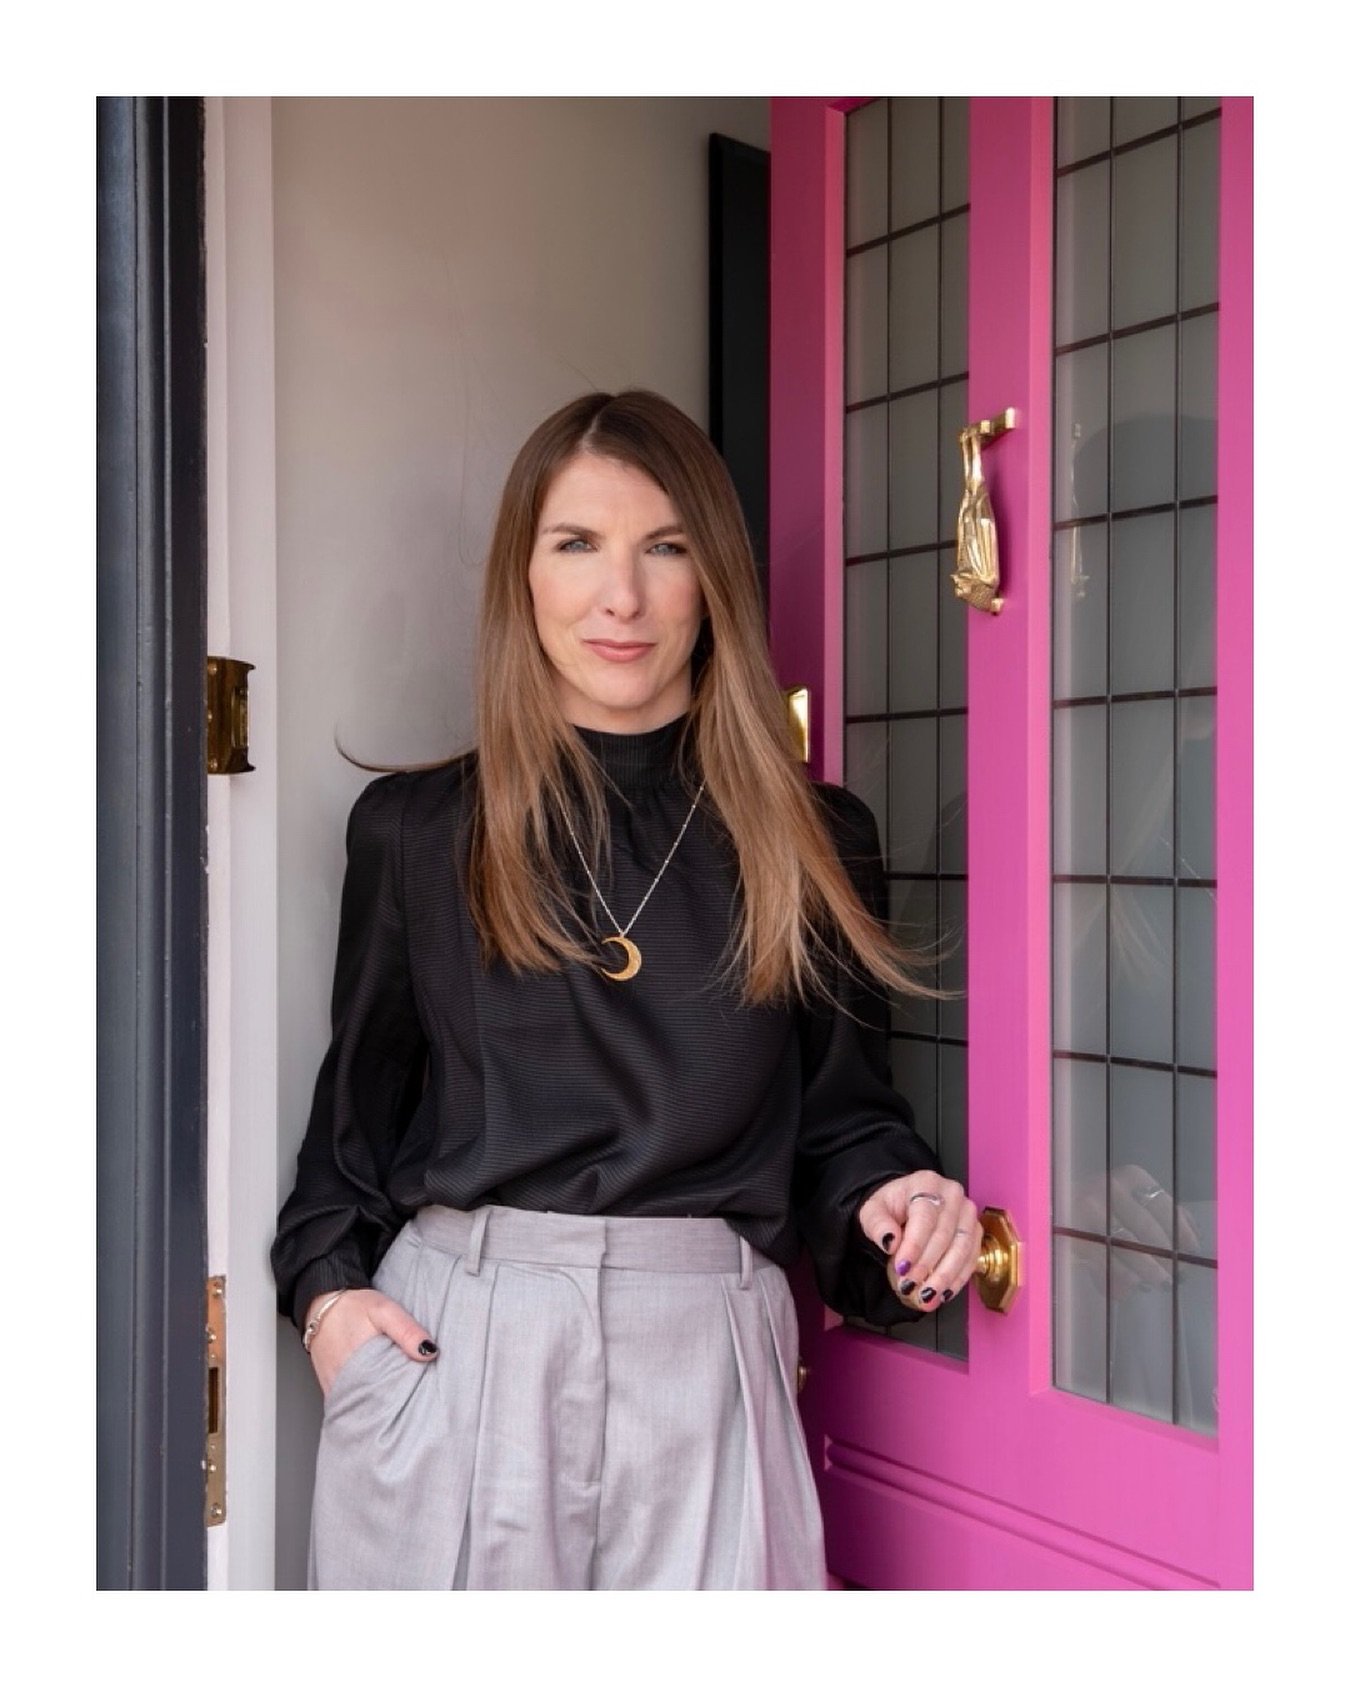 Excited to announce that Howson Design is now part of the Muddy Stilettos Little Black Book! 
I&rsquo;m Katy, the founder and interior designer behind the scenes. With a passion for injecting personality into spaces, I&rsquo;ve embarked on a journey 